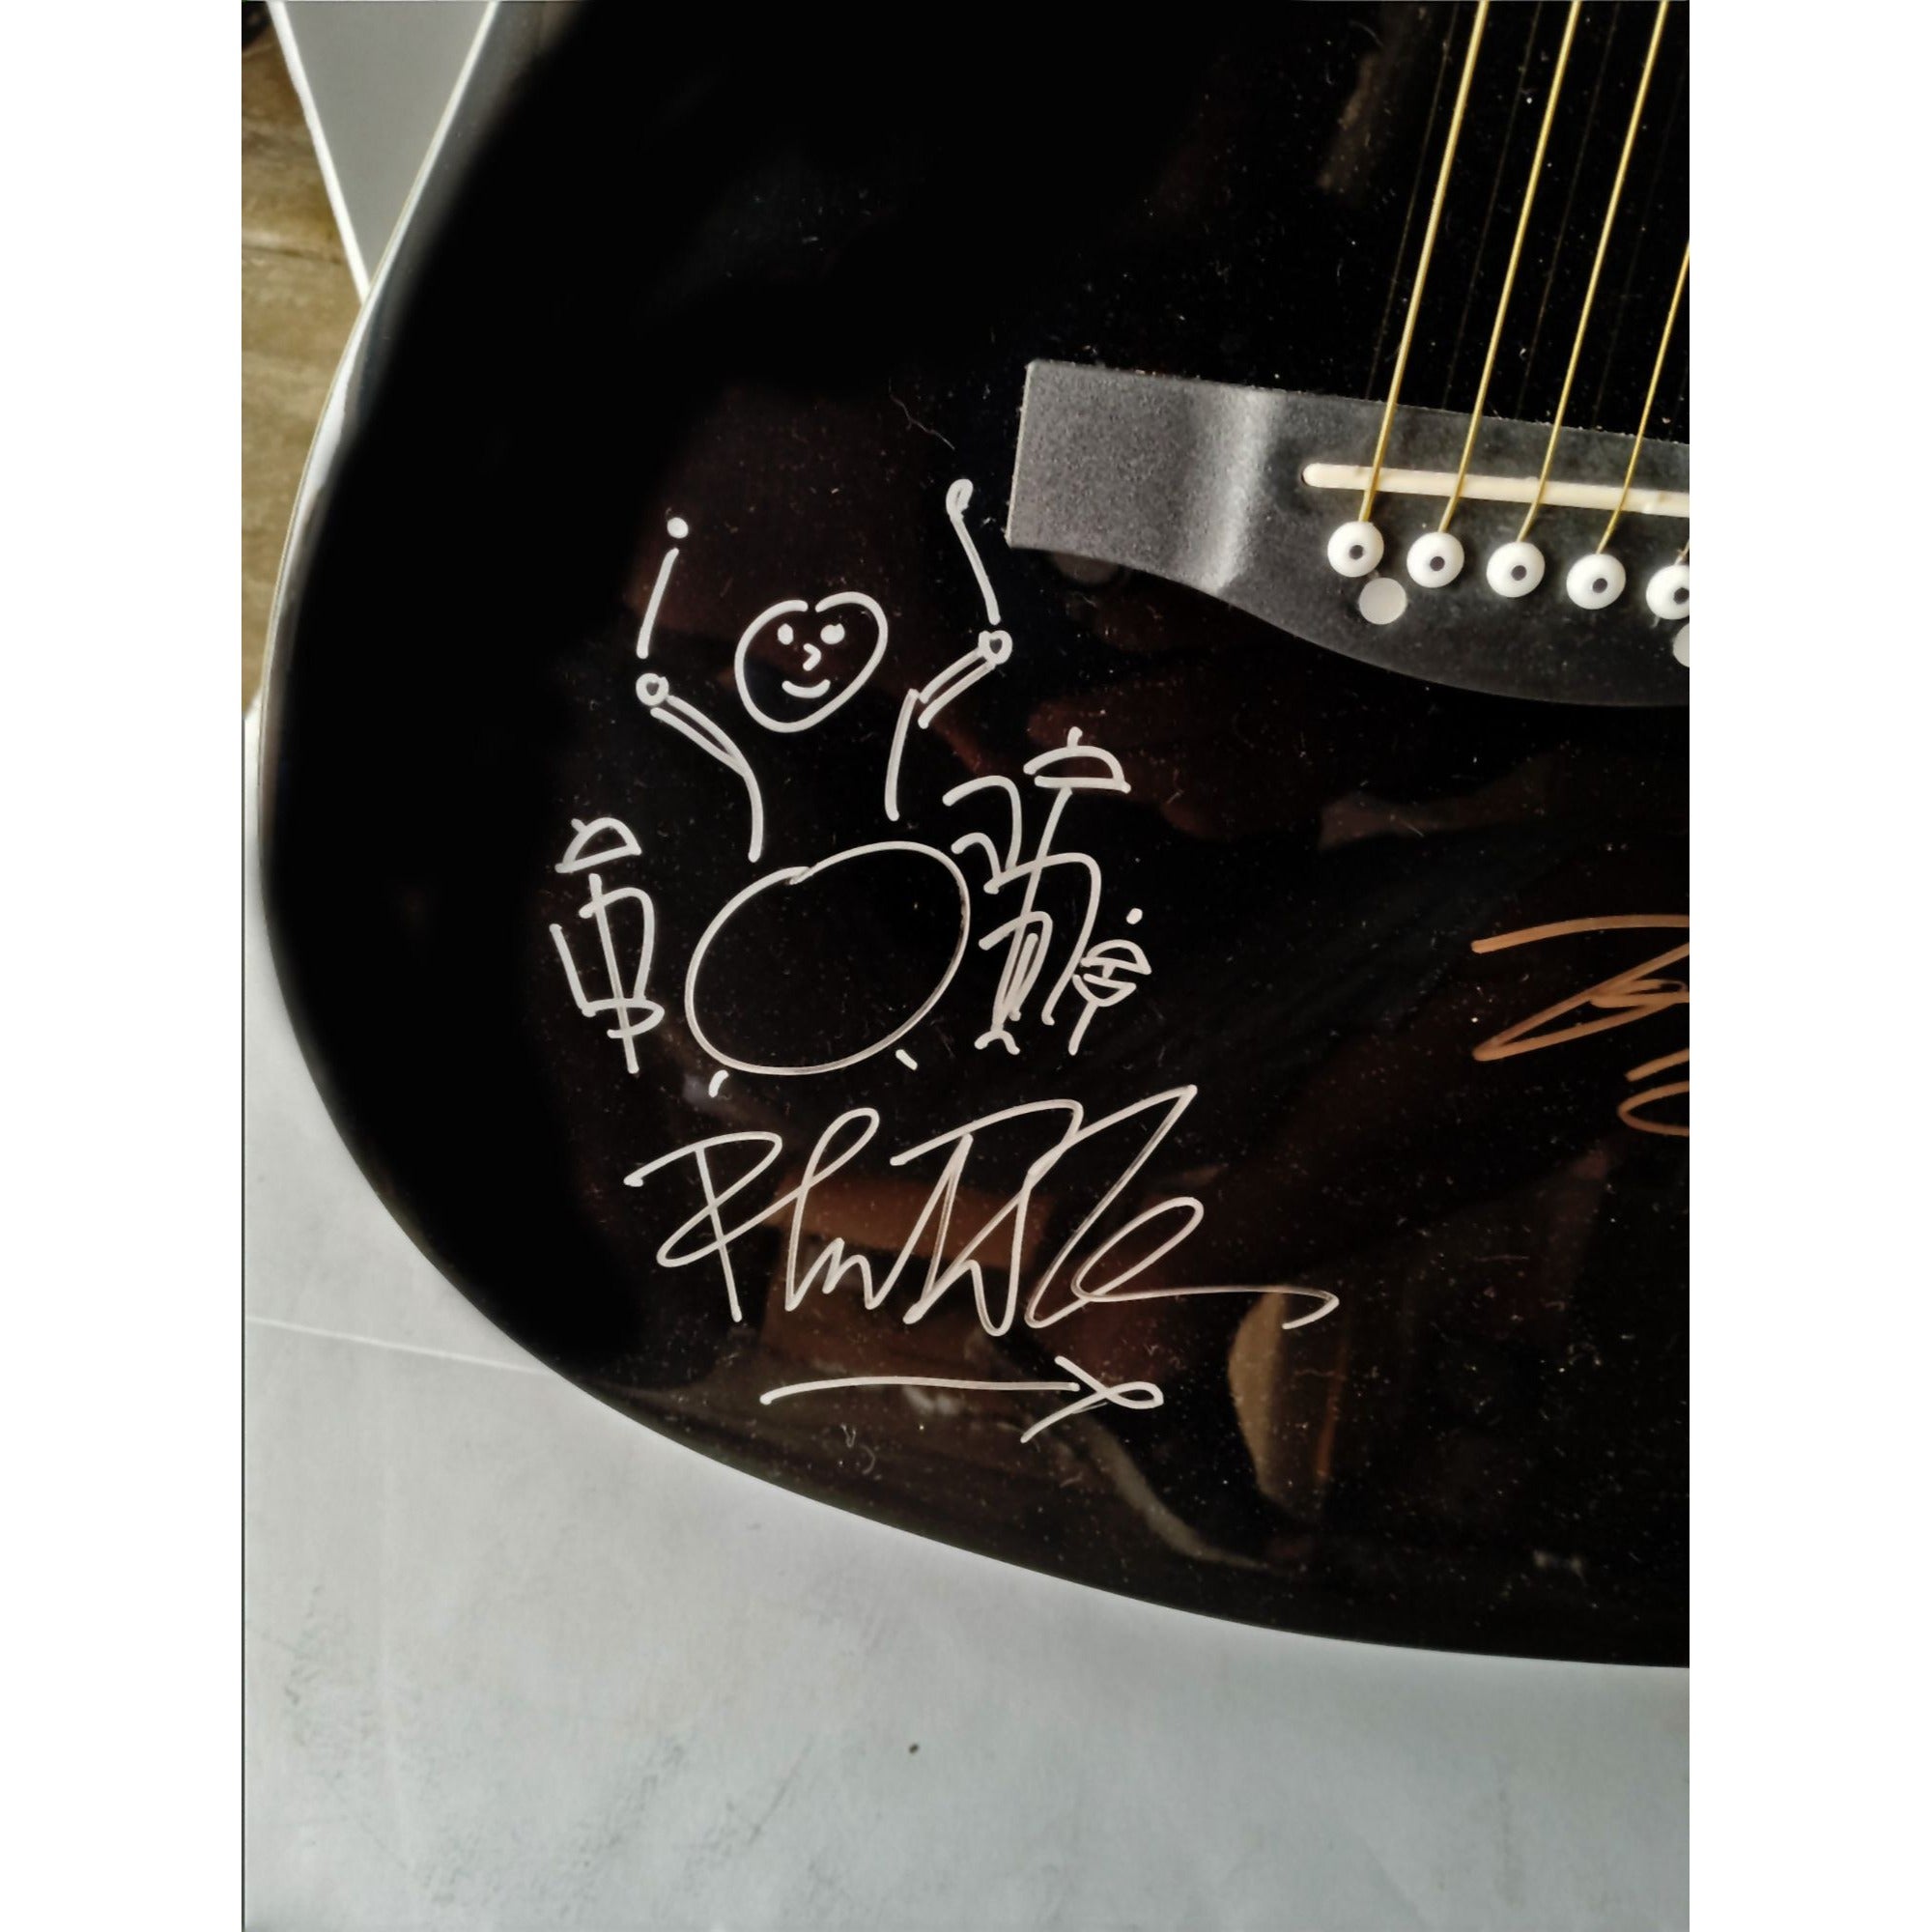 Phil Collins, Peter Gabriel, Tony Banks, Mike Rutherford, Genesis signed guitar with proof